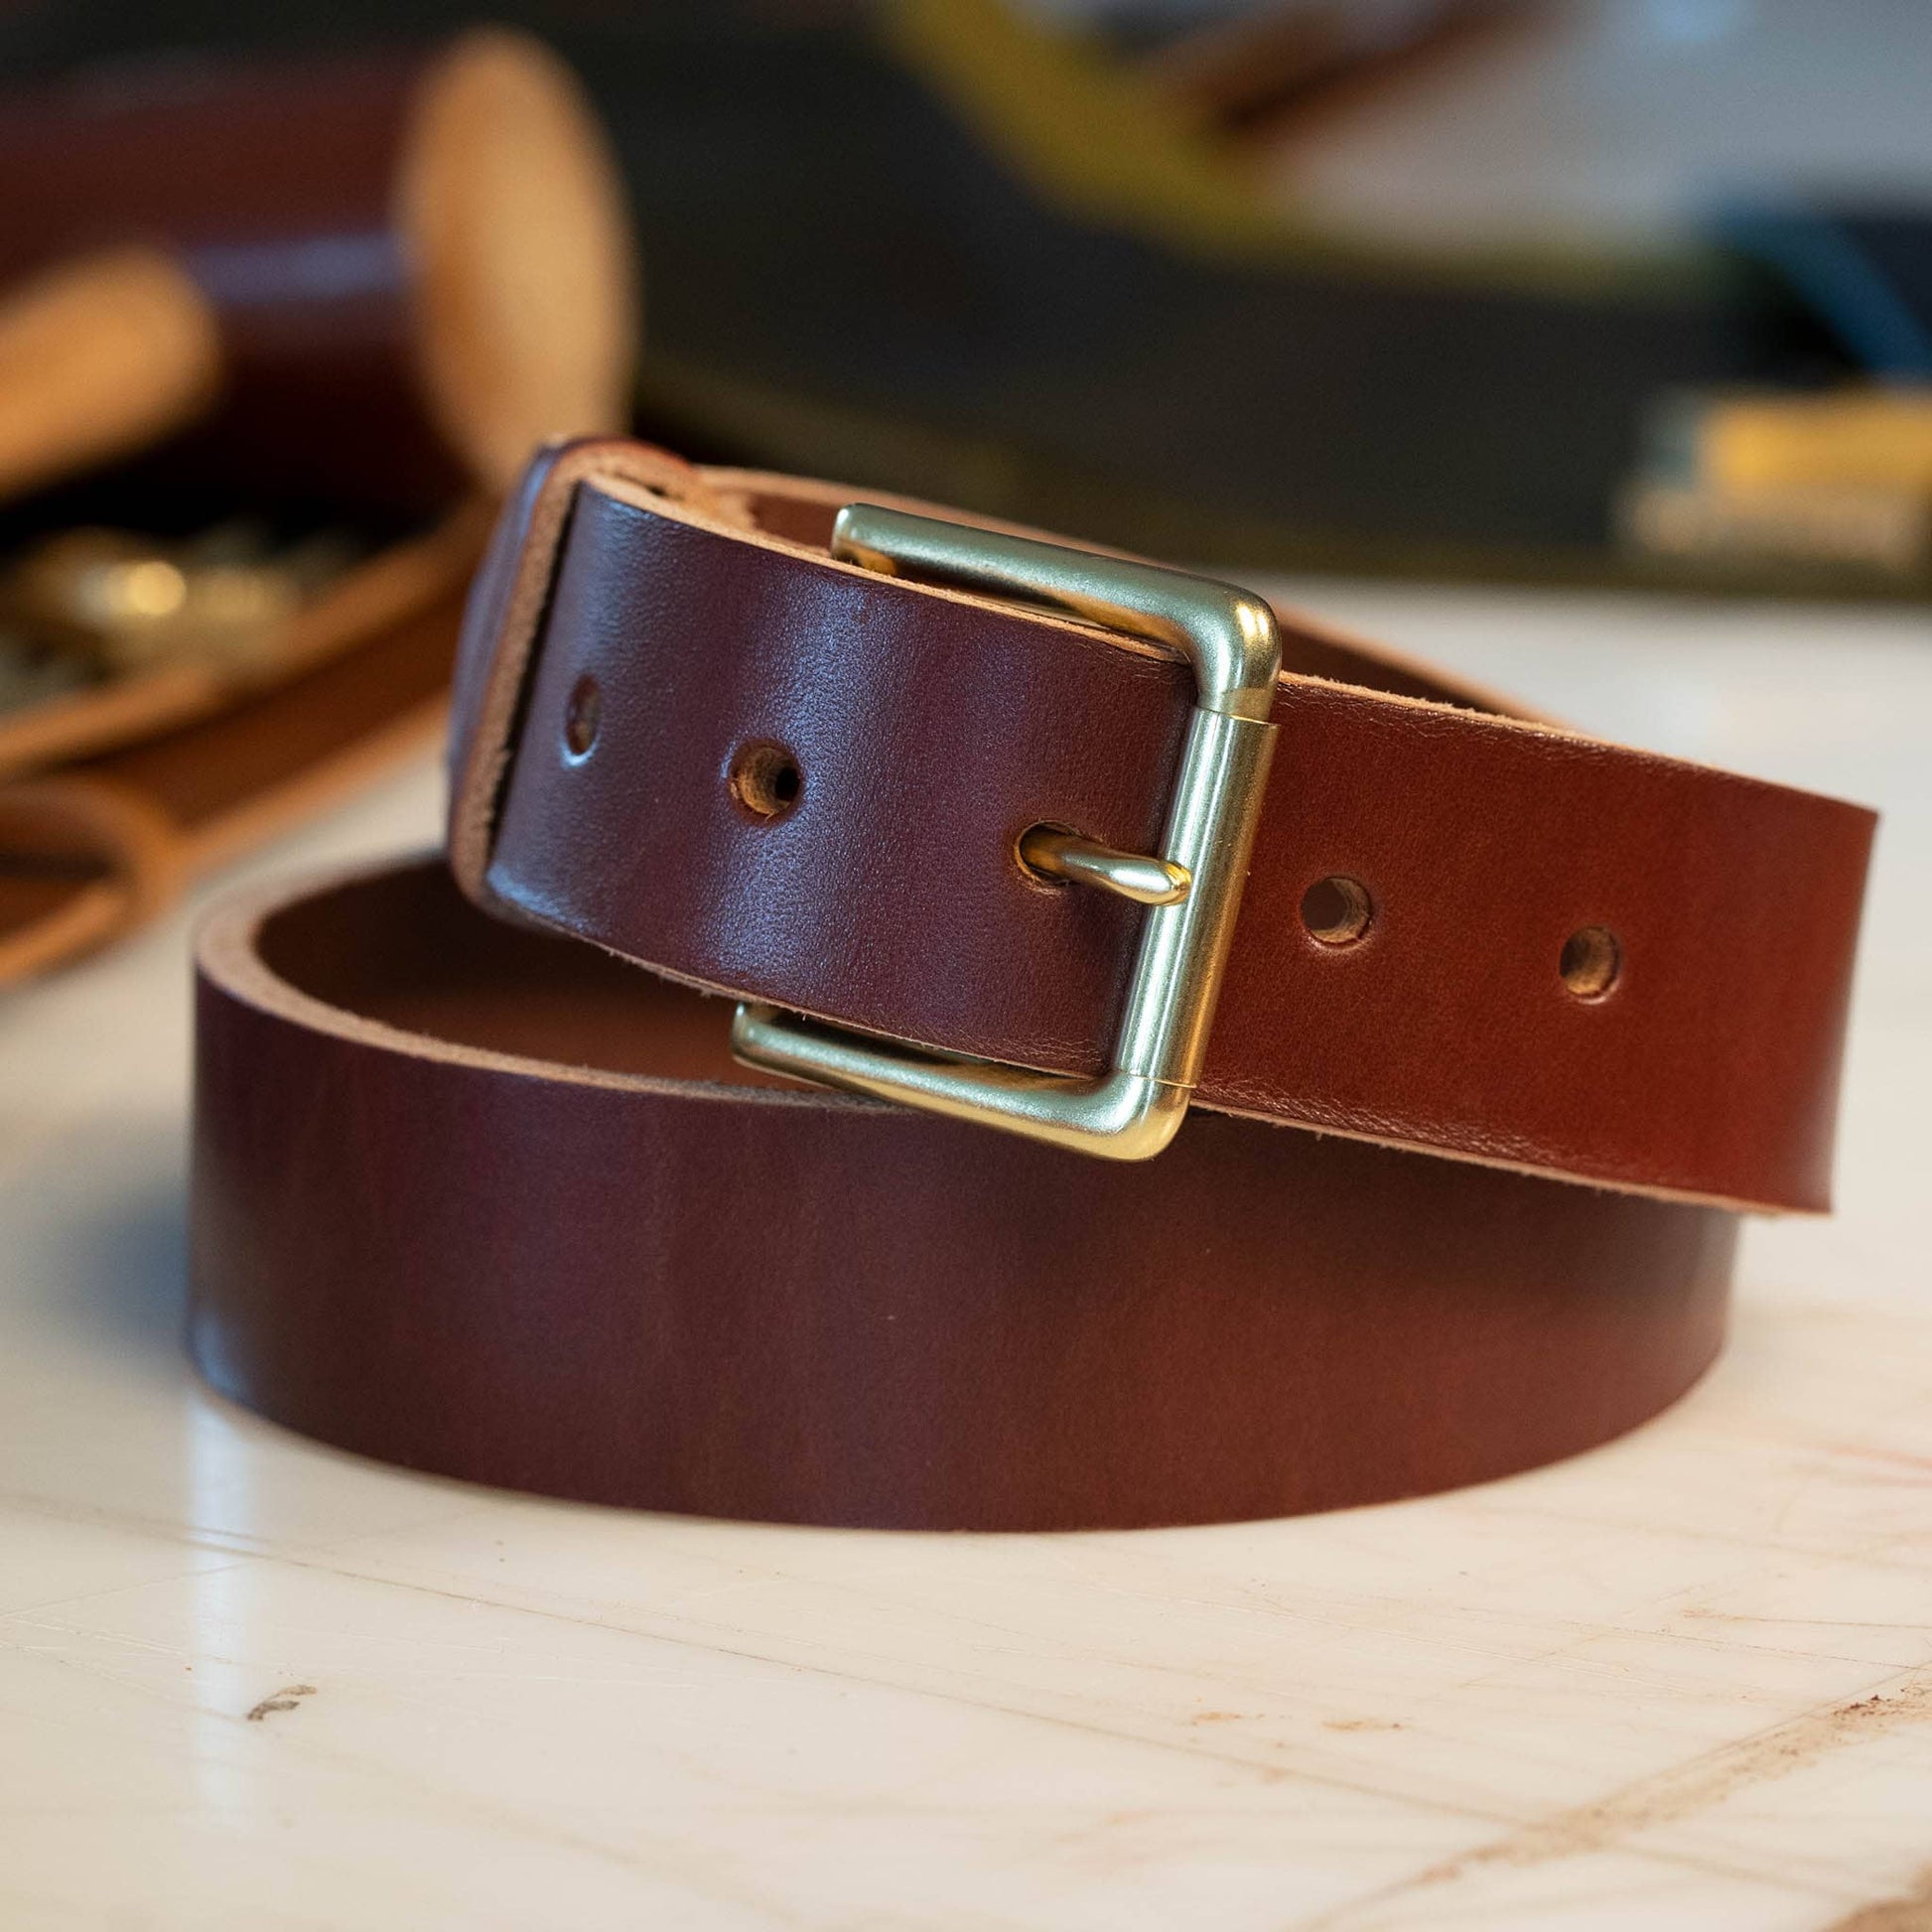 British Brown leather belt with a brass casual buckle.